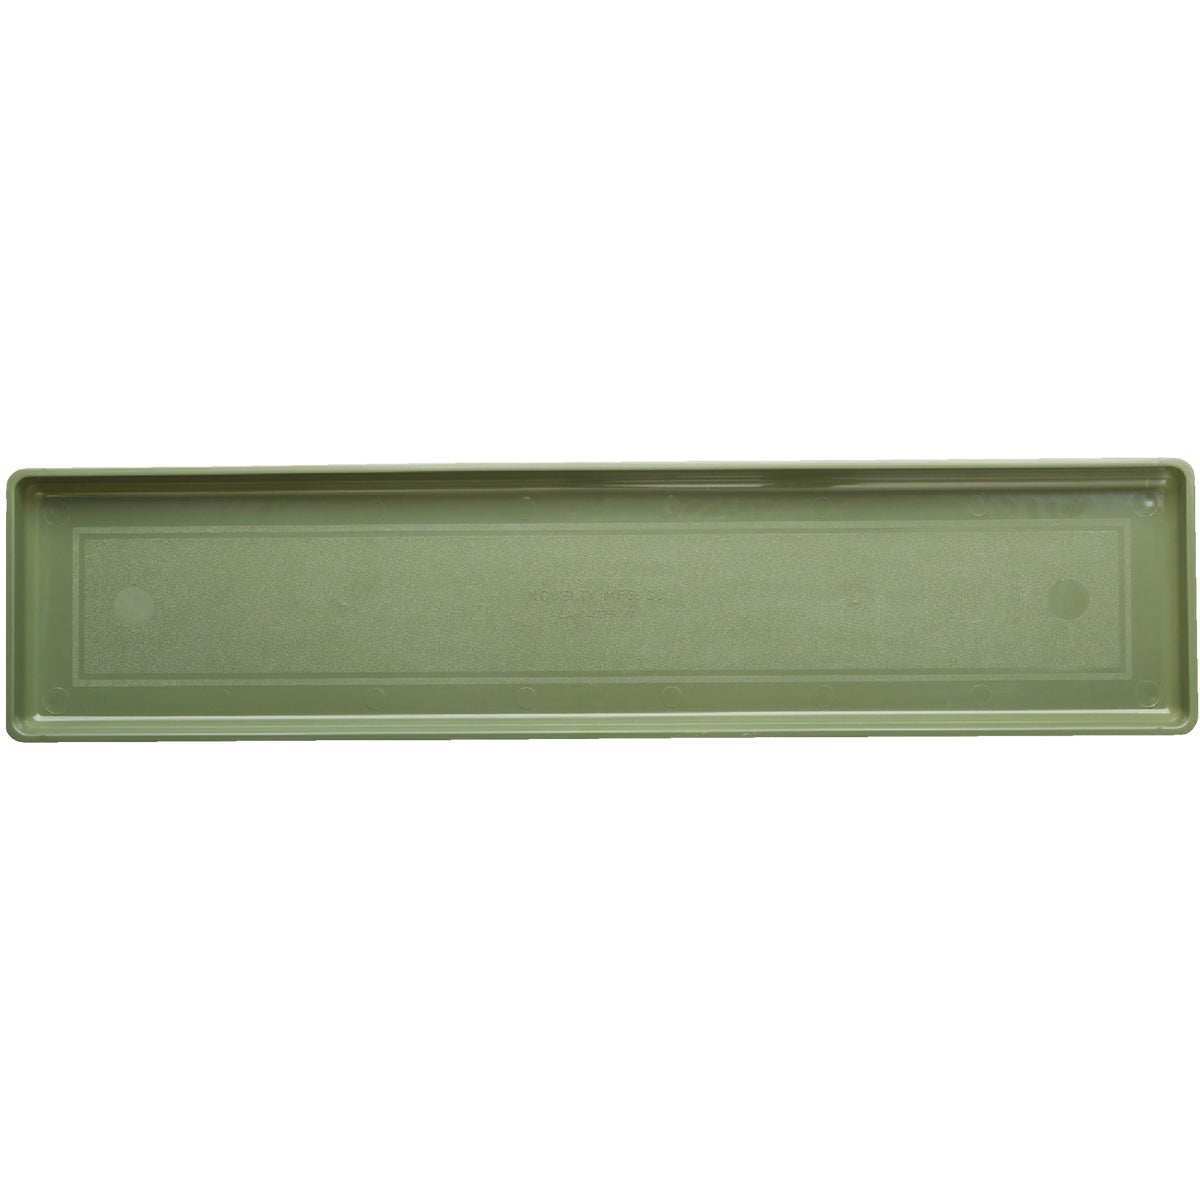 Novelty Countryside 24 In. Sage Plastic Flower Box Tray